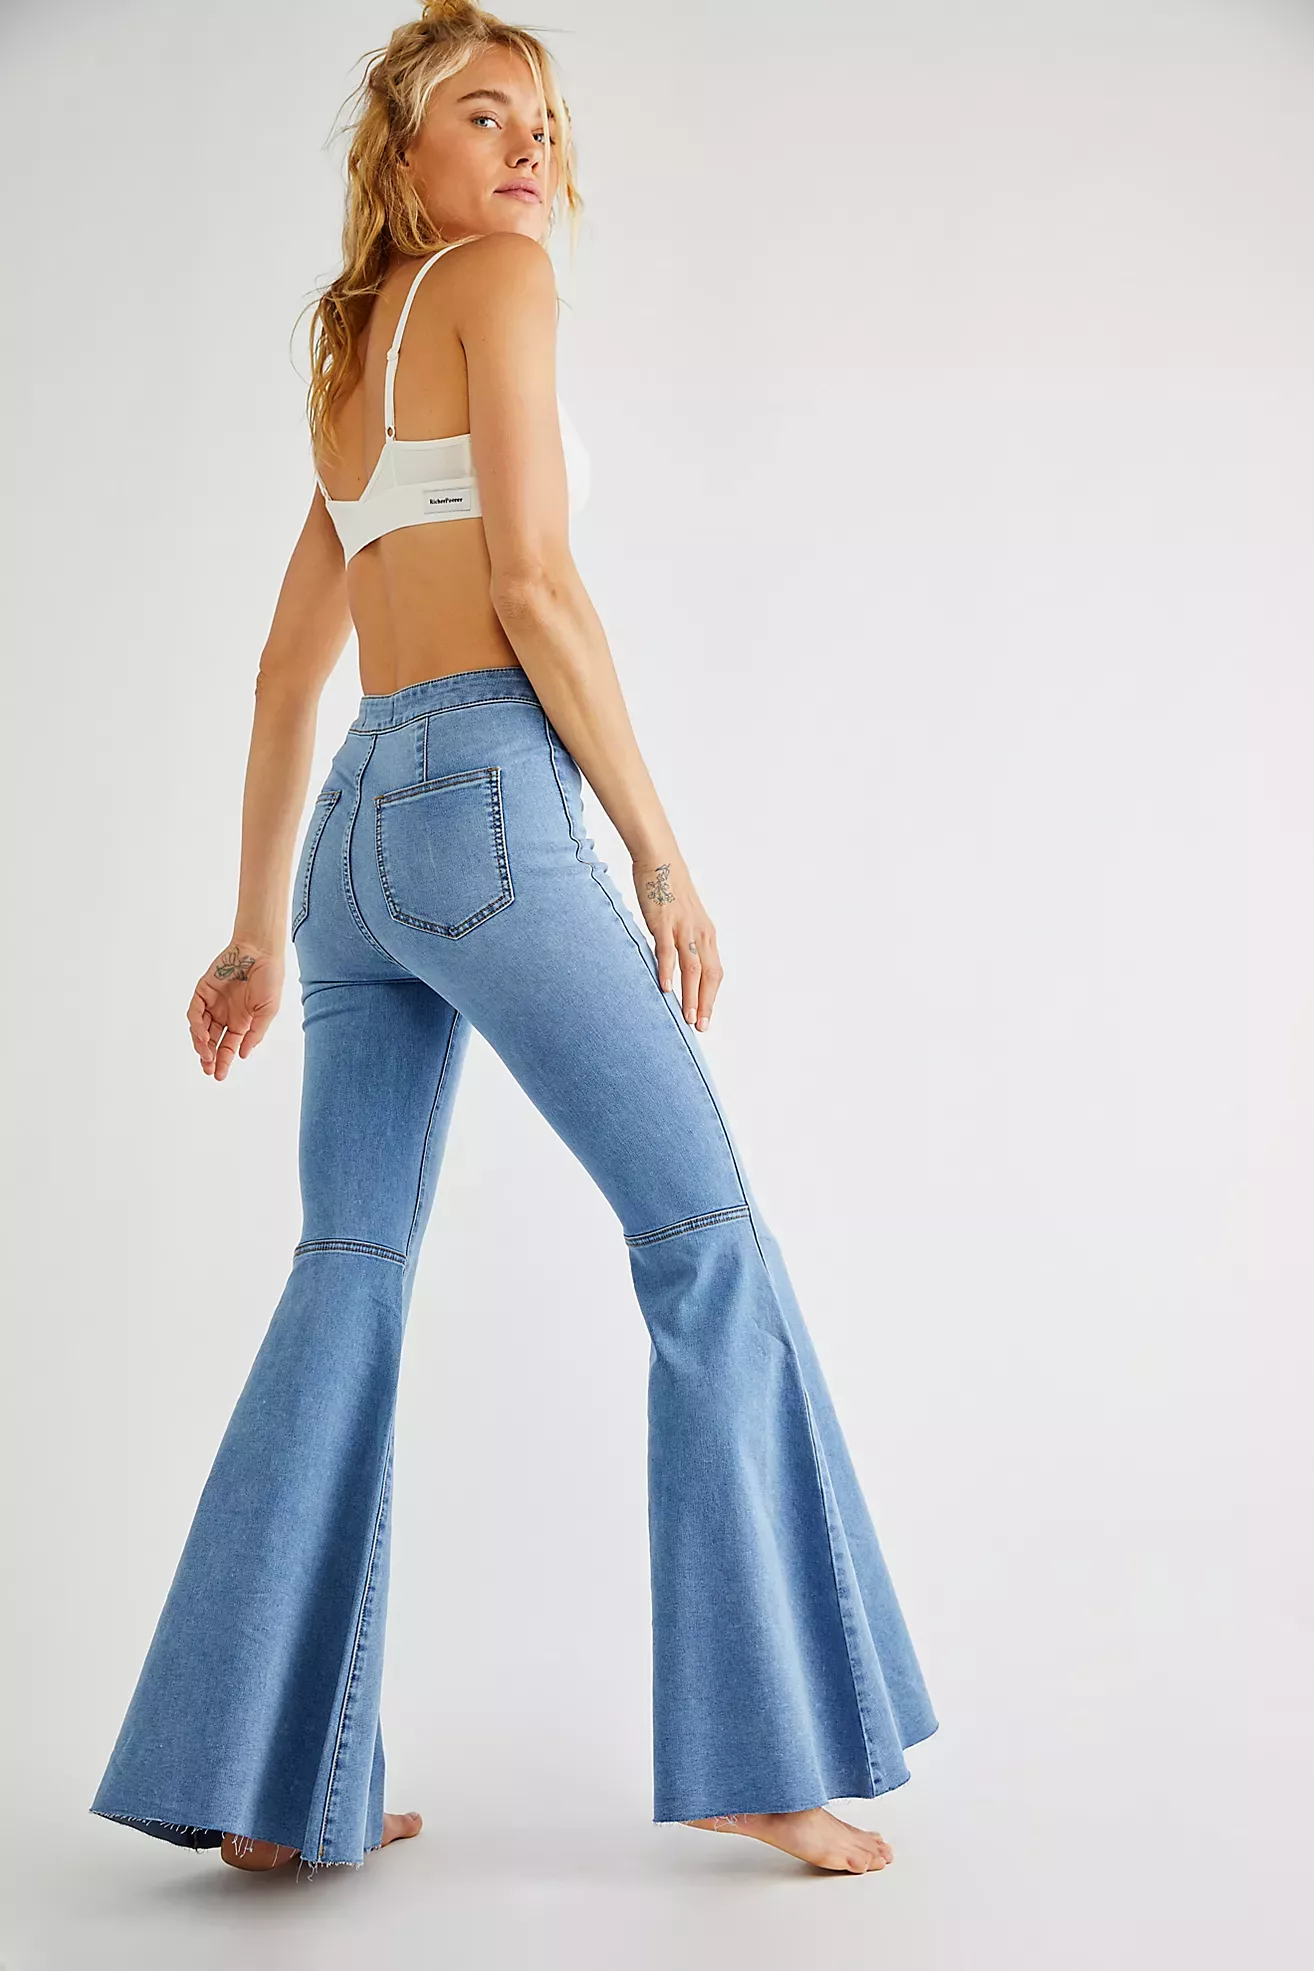 Bell bottoms making comeback – The Len Parent Style